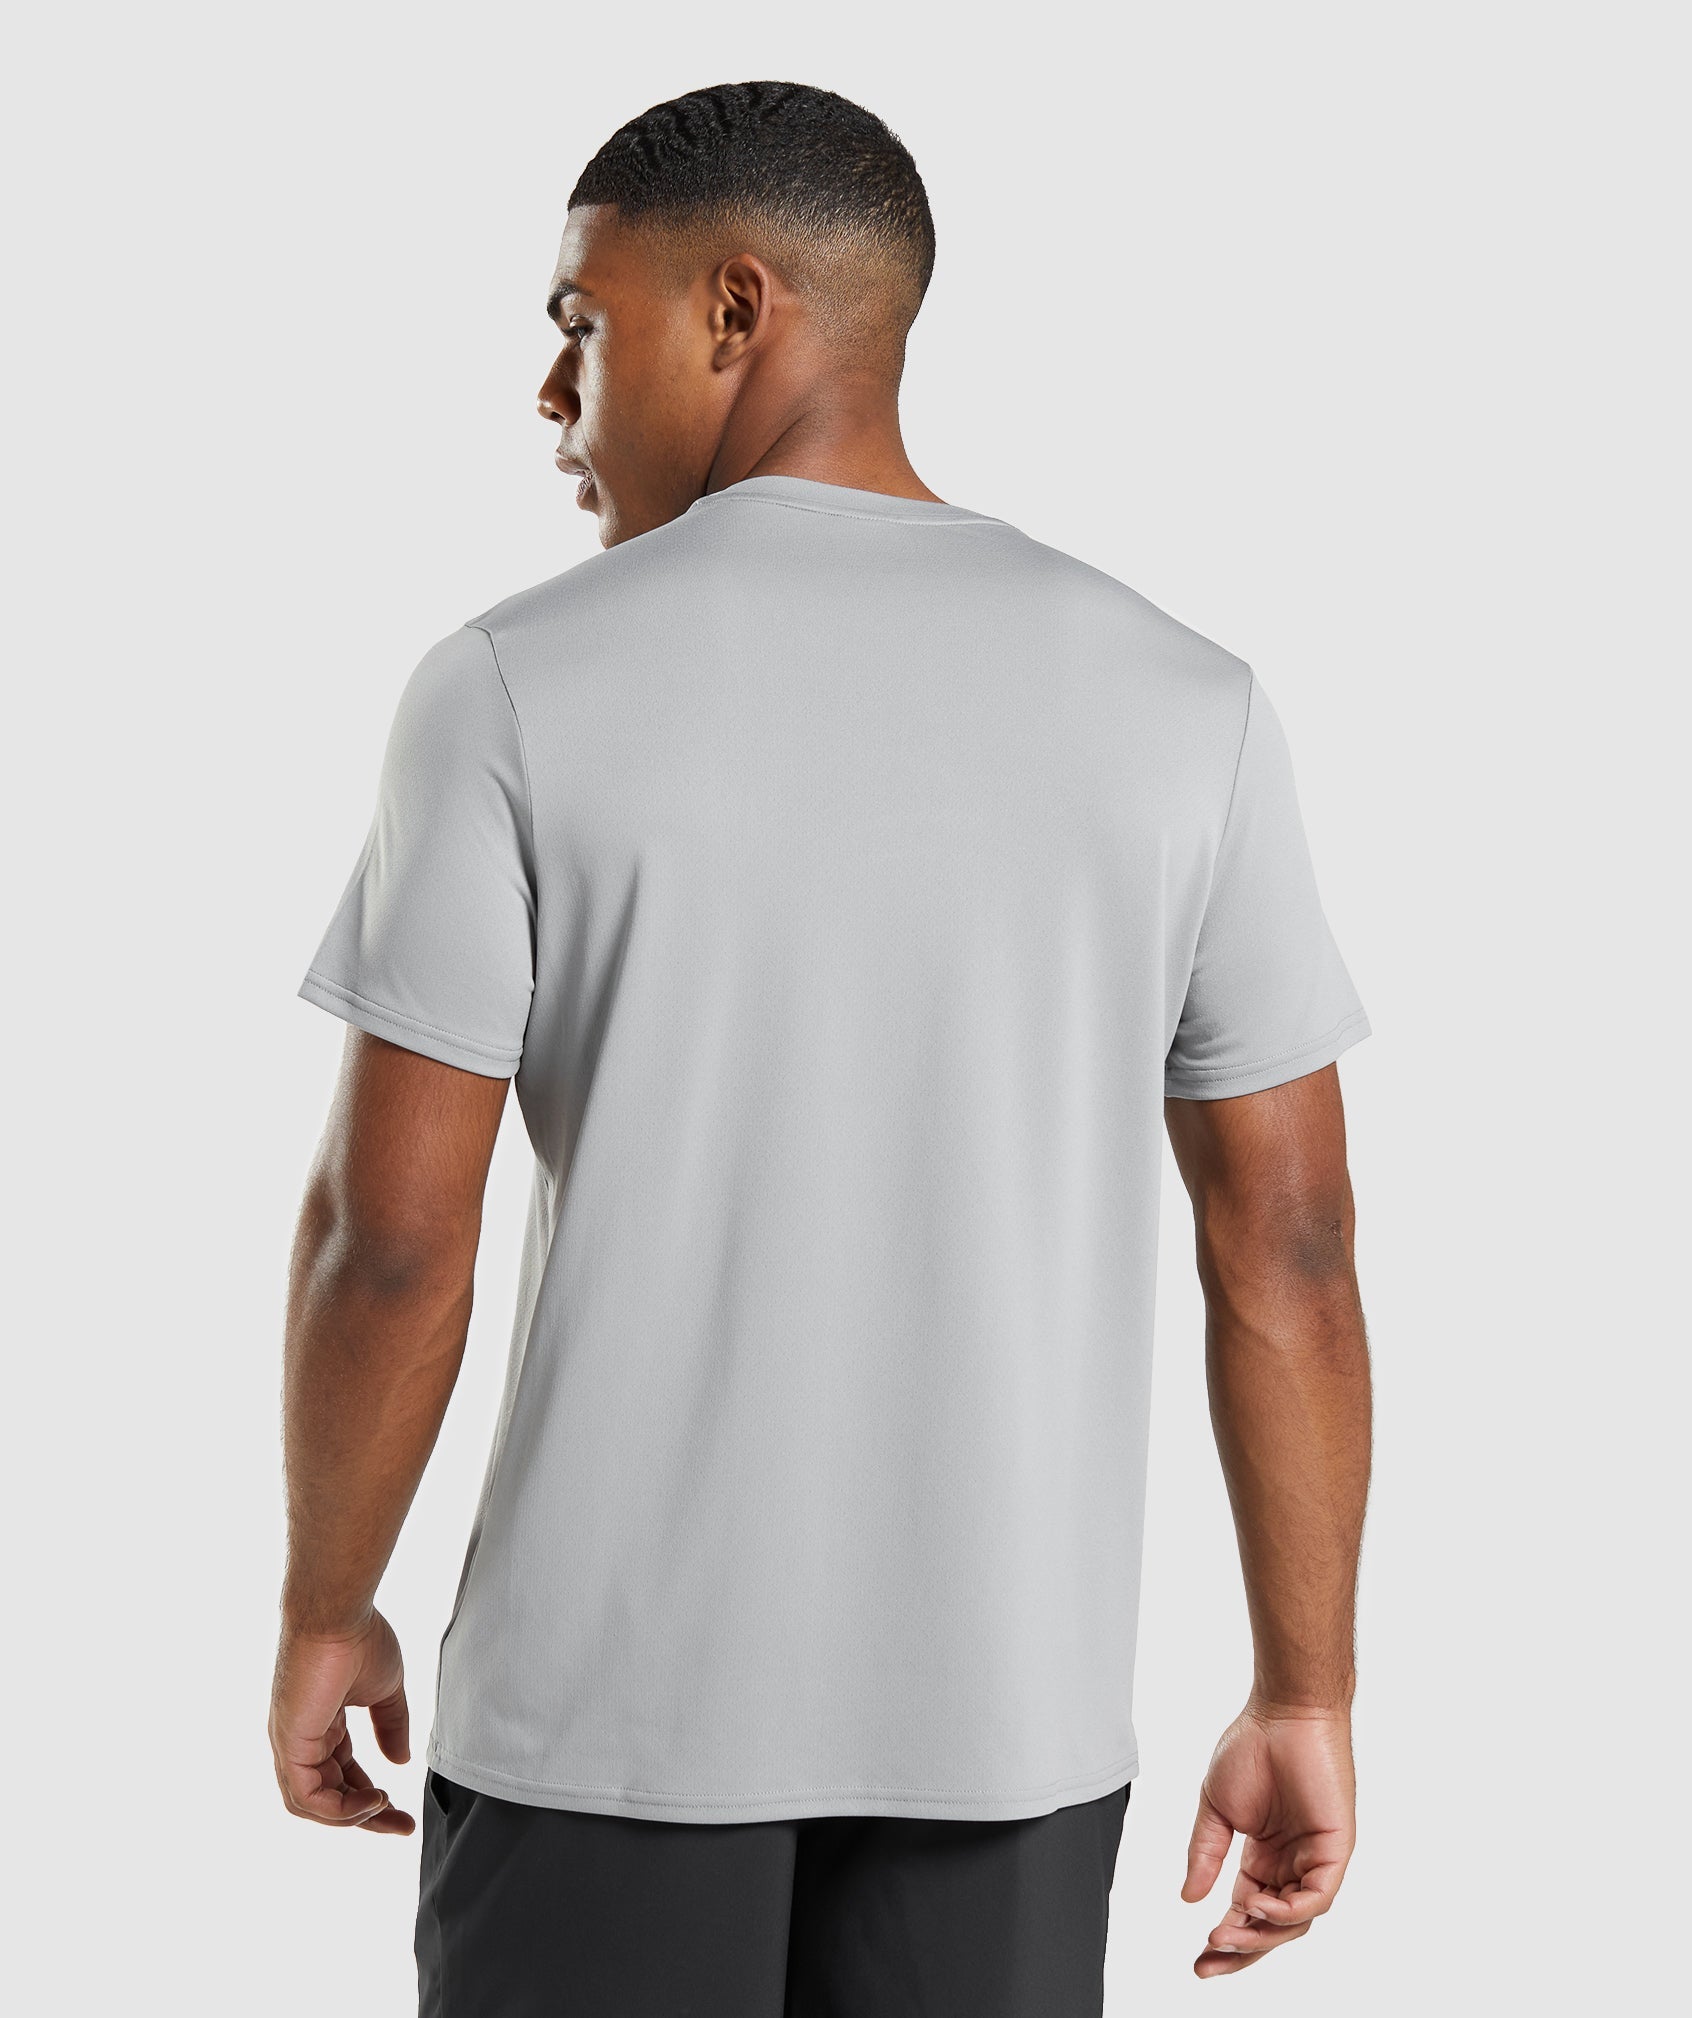 Arrival Regular Fit T-Shirt in Smokey Grey - view 3